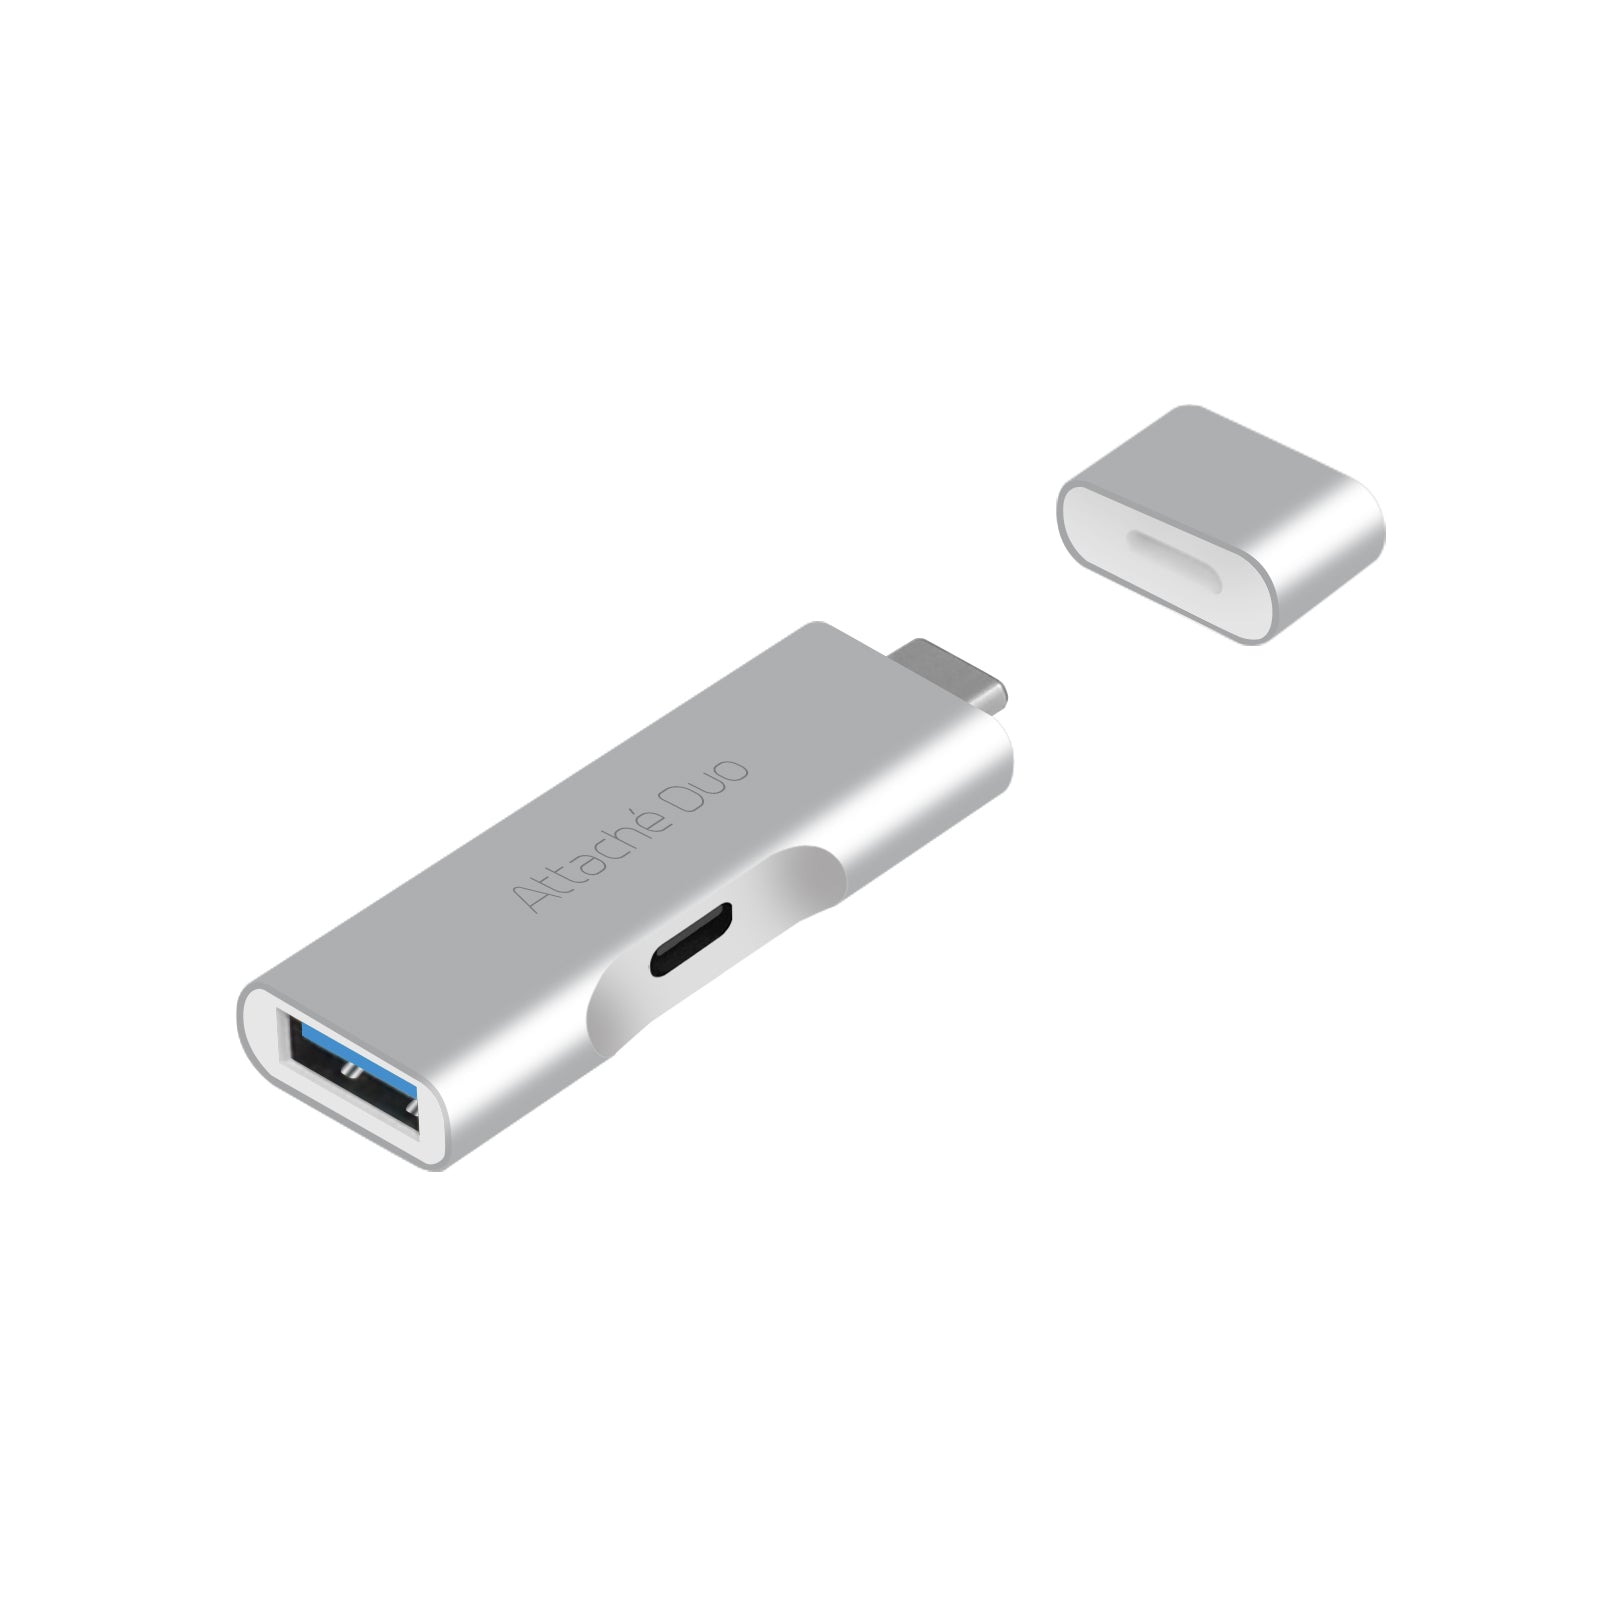 MBEAT  Attach Duo Type-C To USB 3.1 Adapter With Type-C Port - Support USB 3.1/3.0/2.0/1.1 devices MBEAT